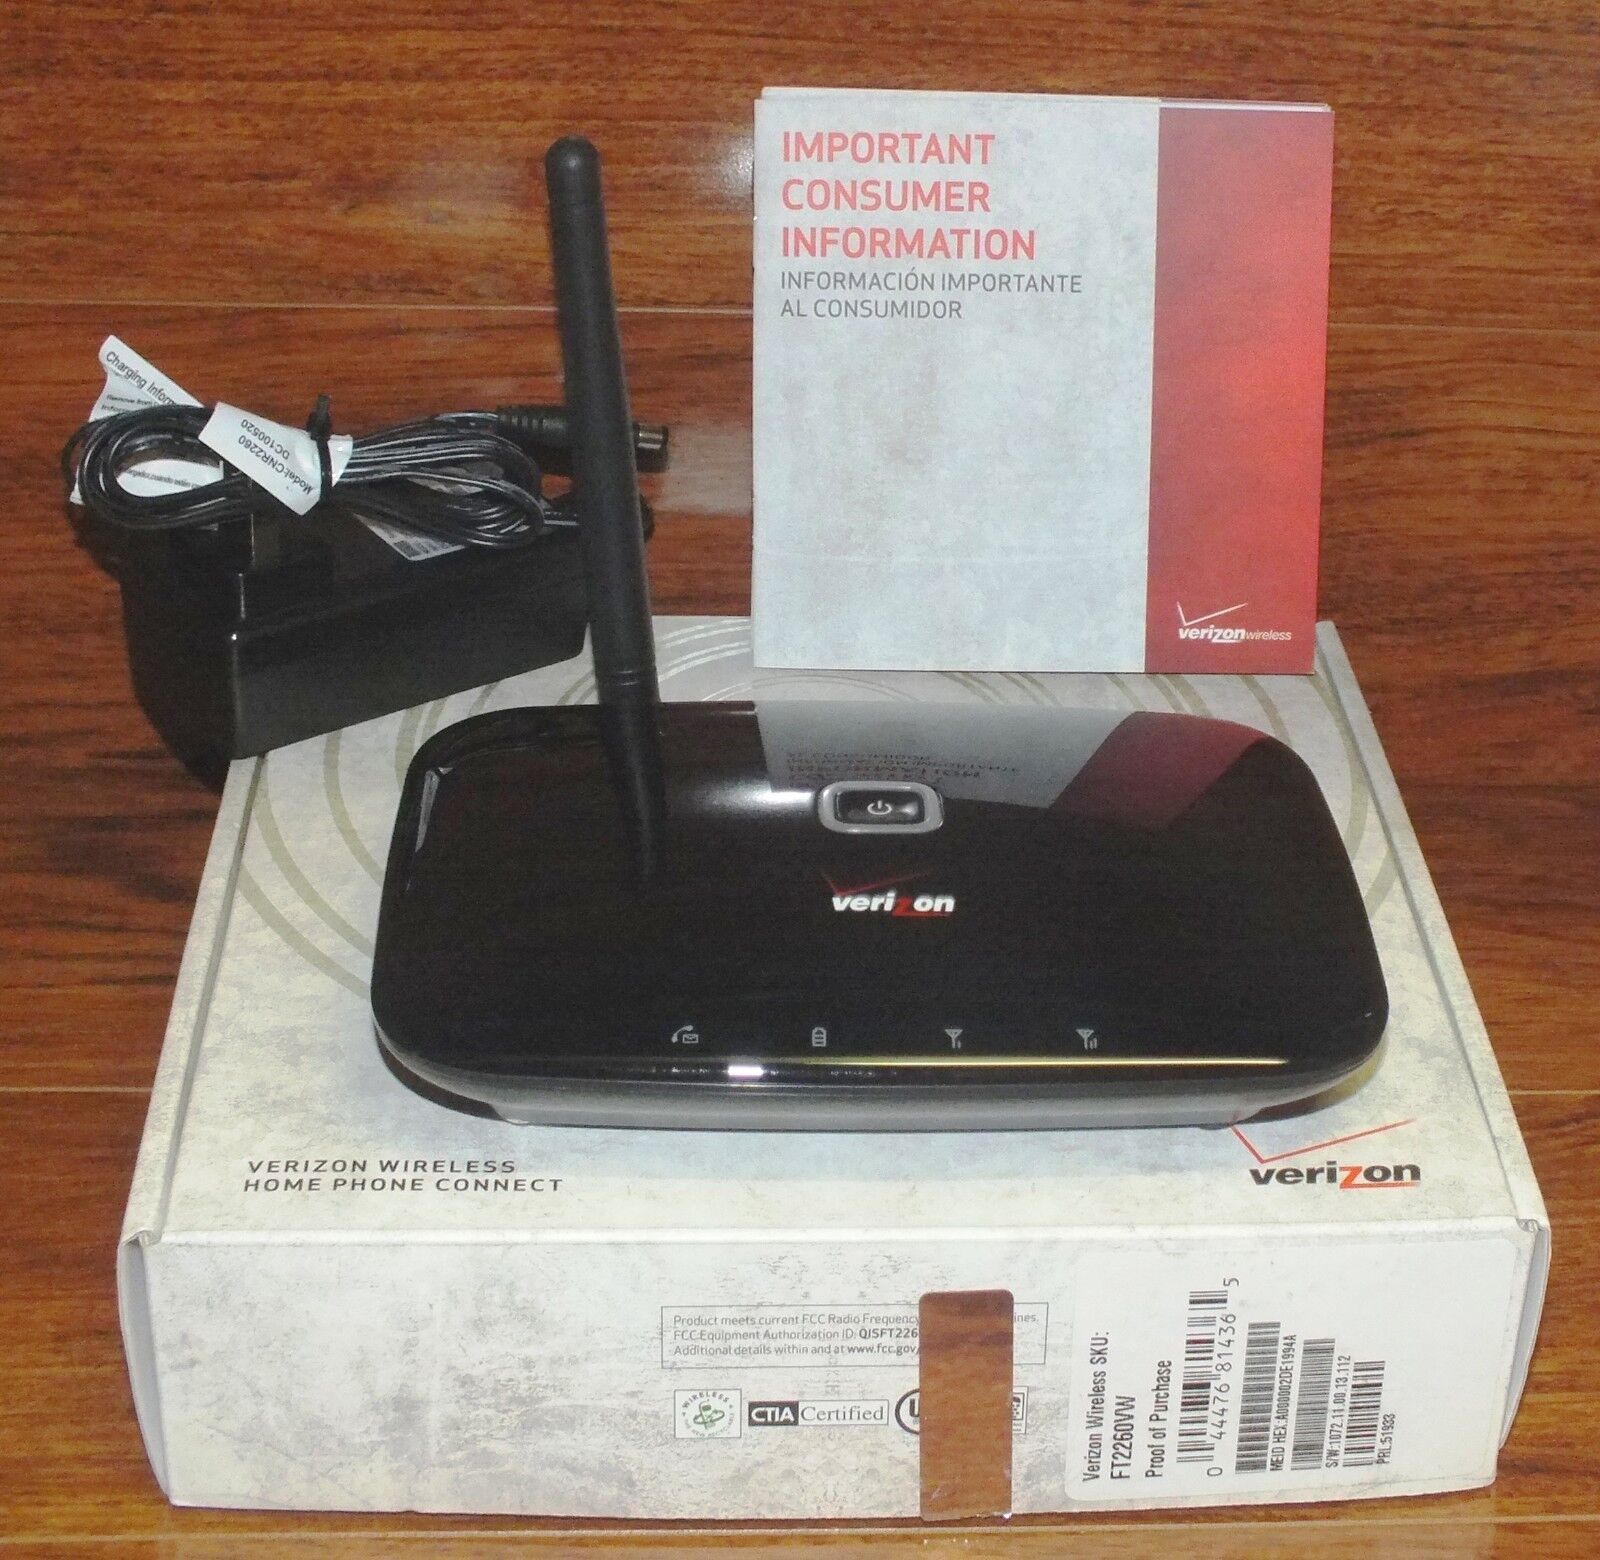 Verizon Wireless HomePhone Connect Wireless Device Huawei (FT2260VW) VZW Network